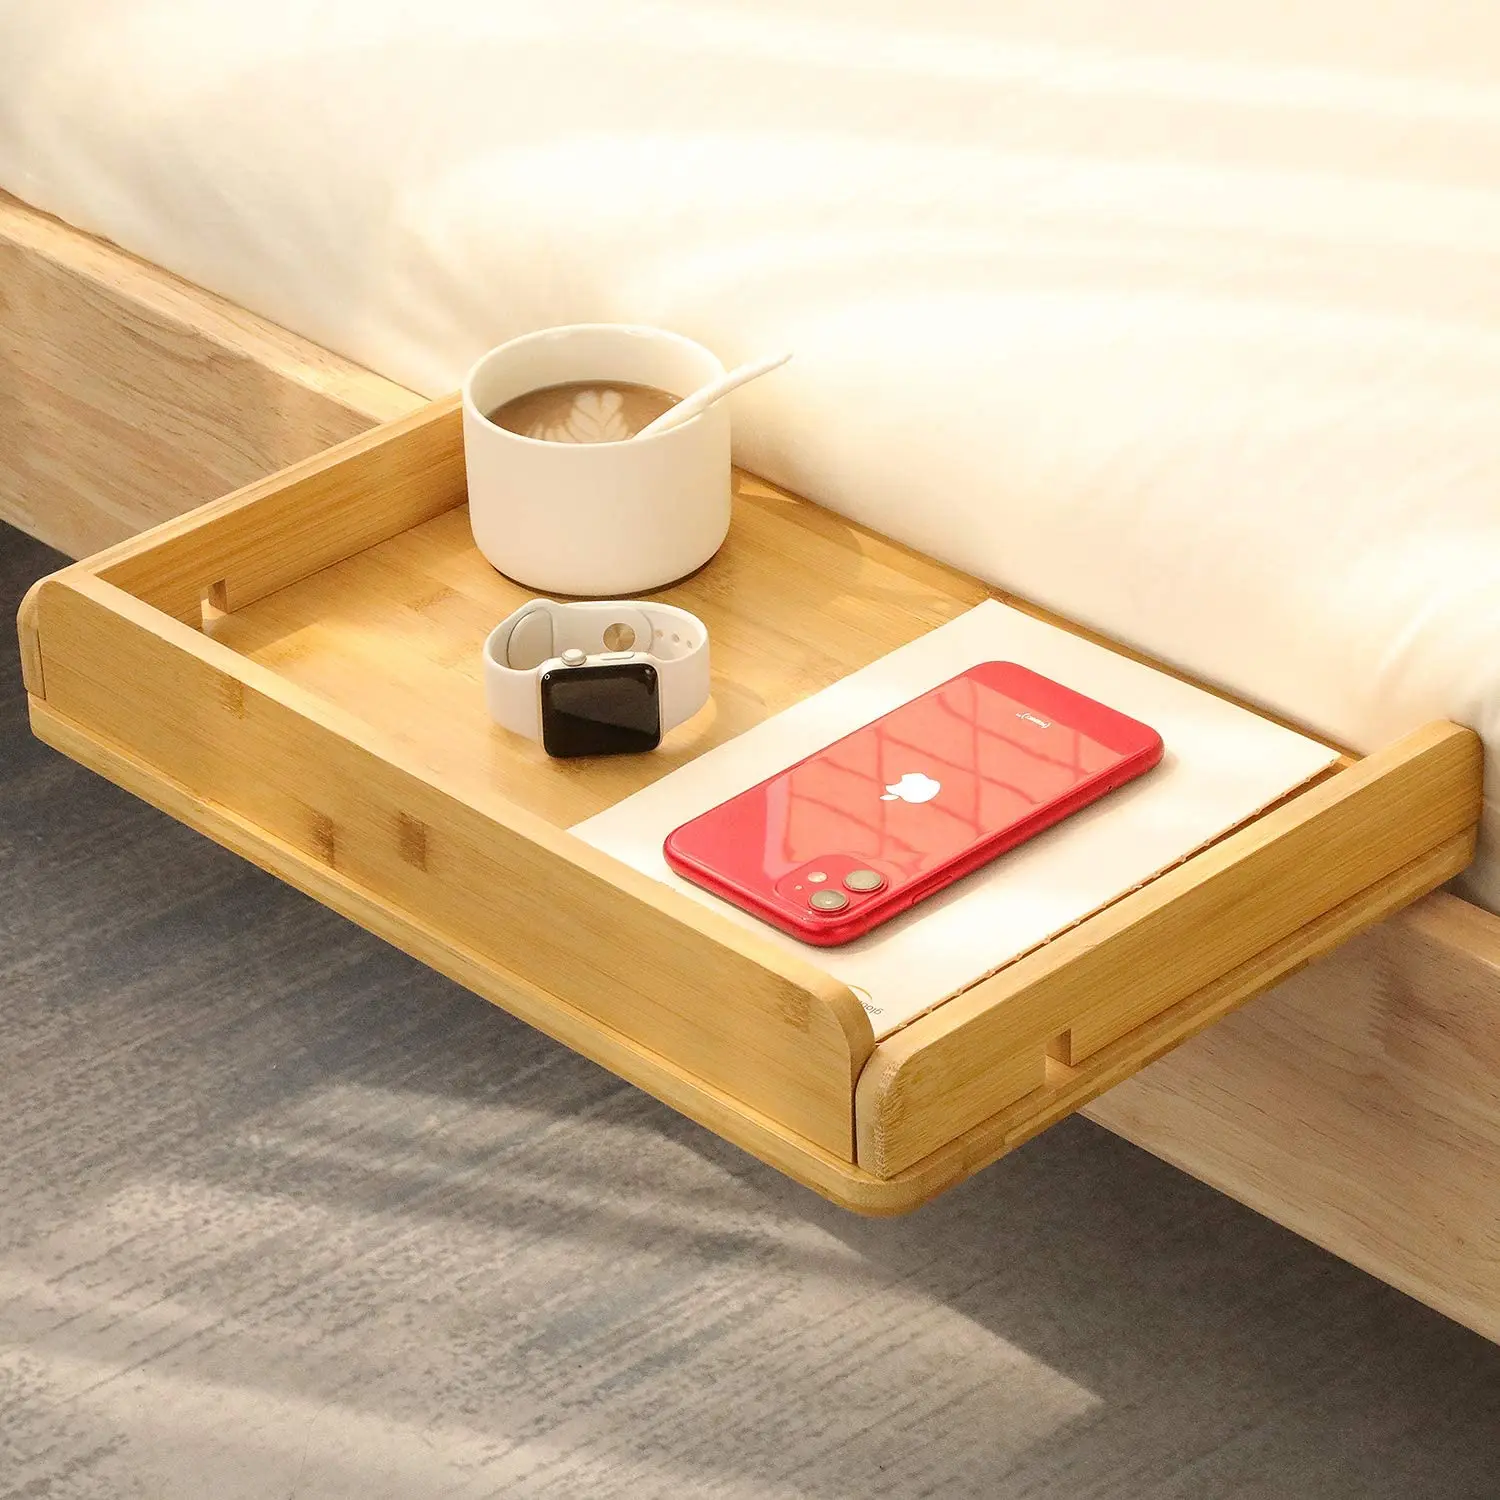 Bedside Easy To Assemble Tablet Computer Holder Can Hold Tissues With Cable Management Bedside Table Bamboo Storage Box